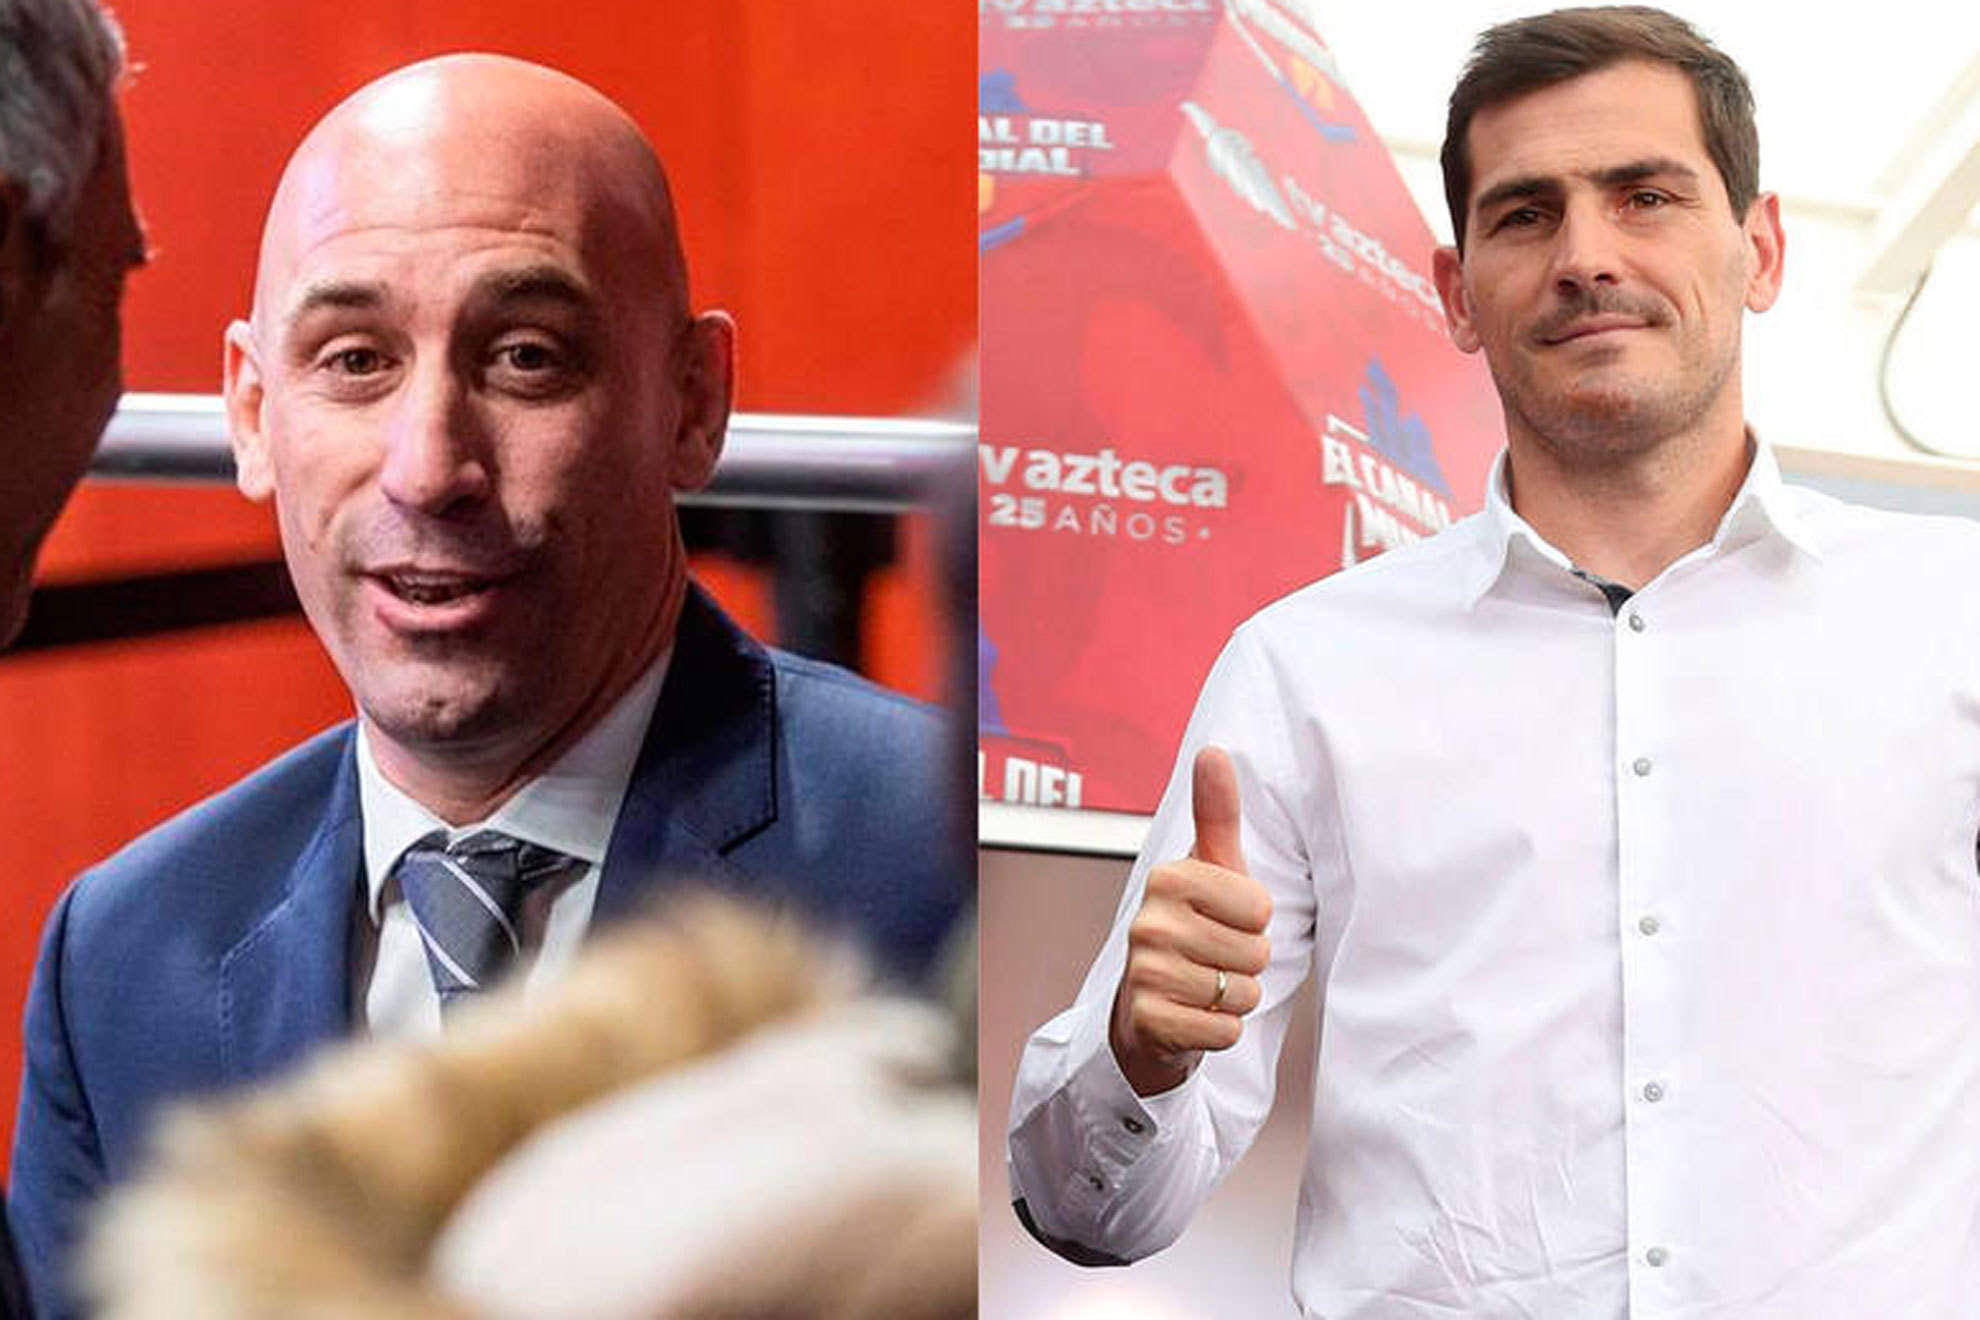 Rubiales and Casillas.